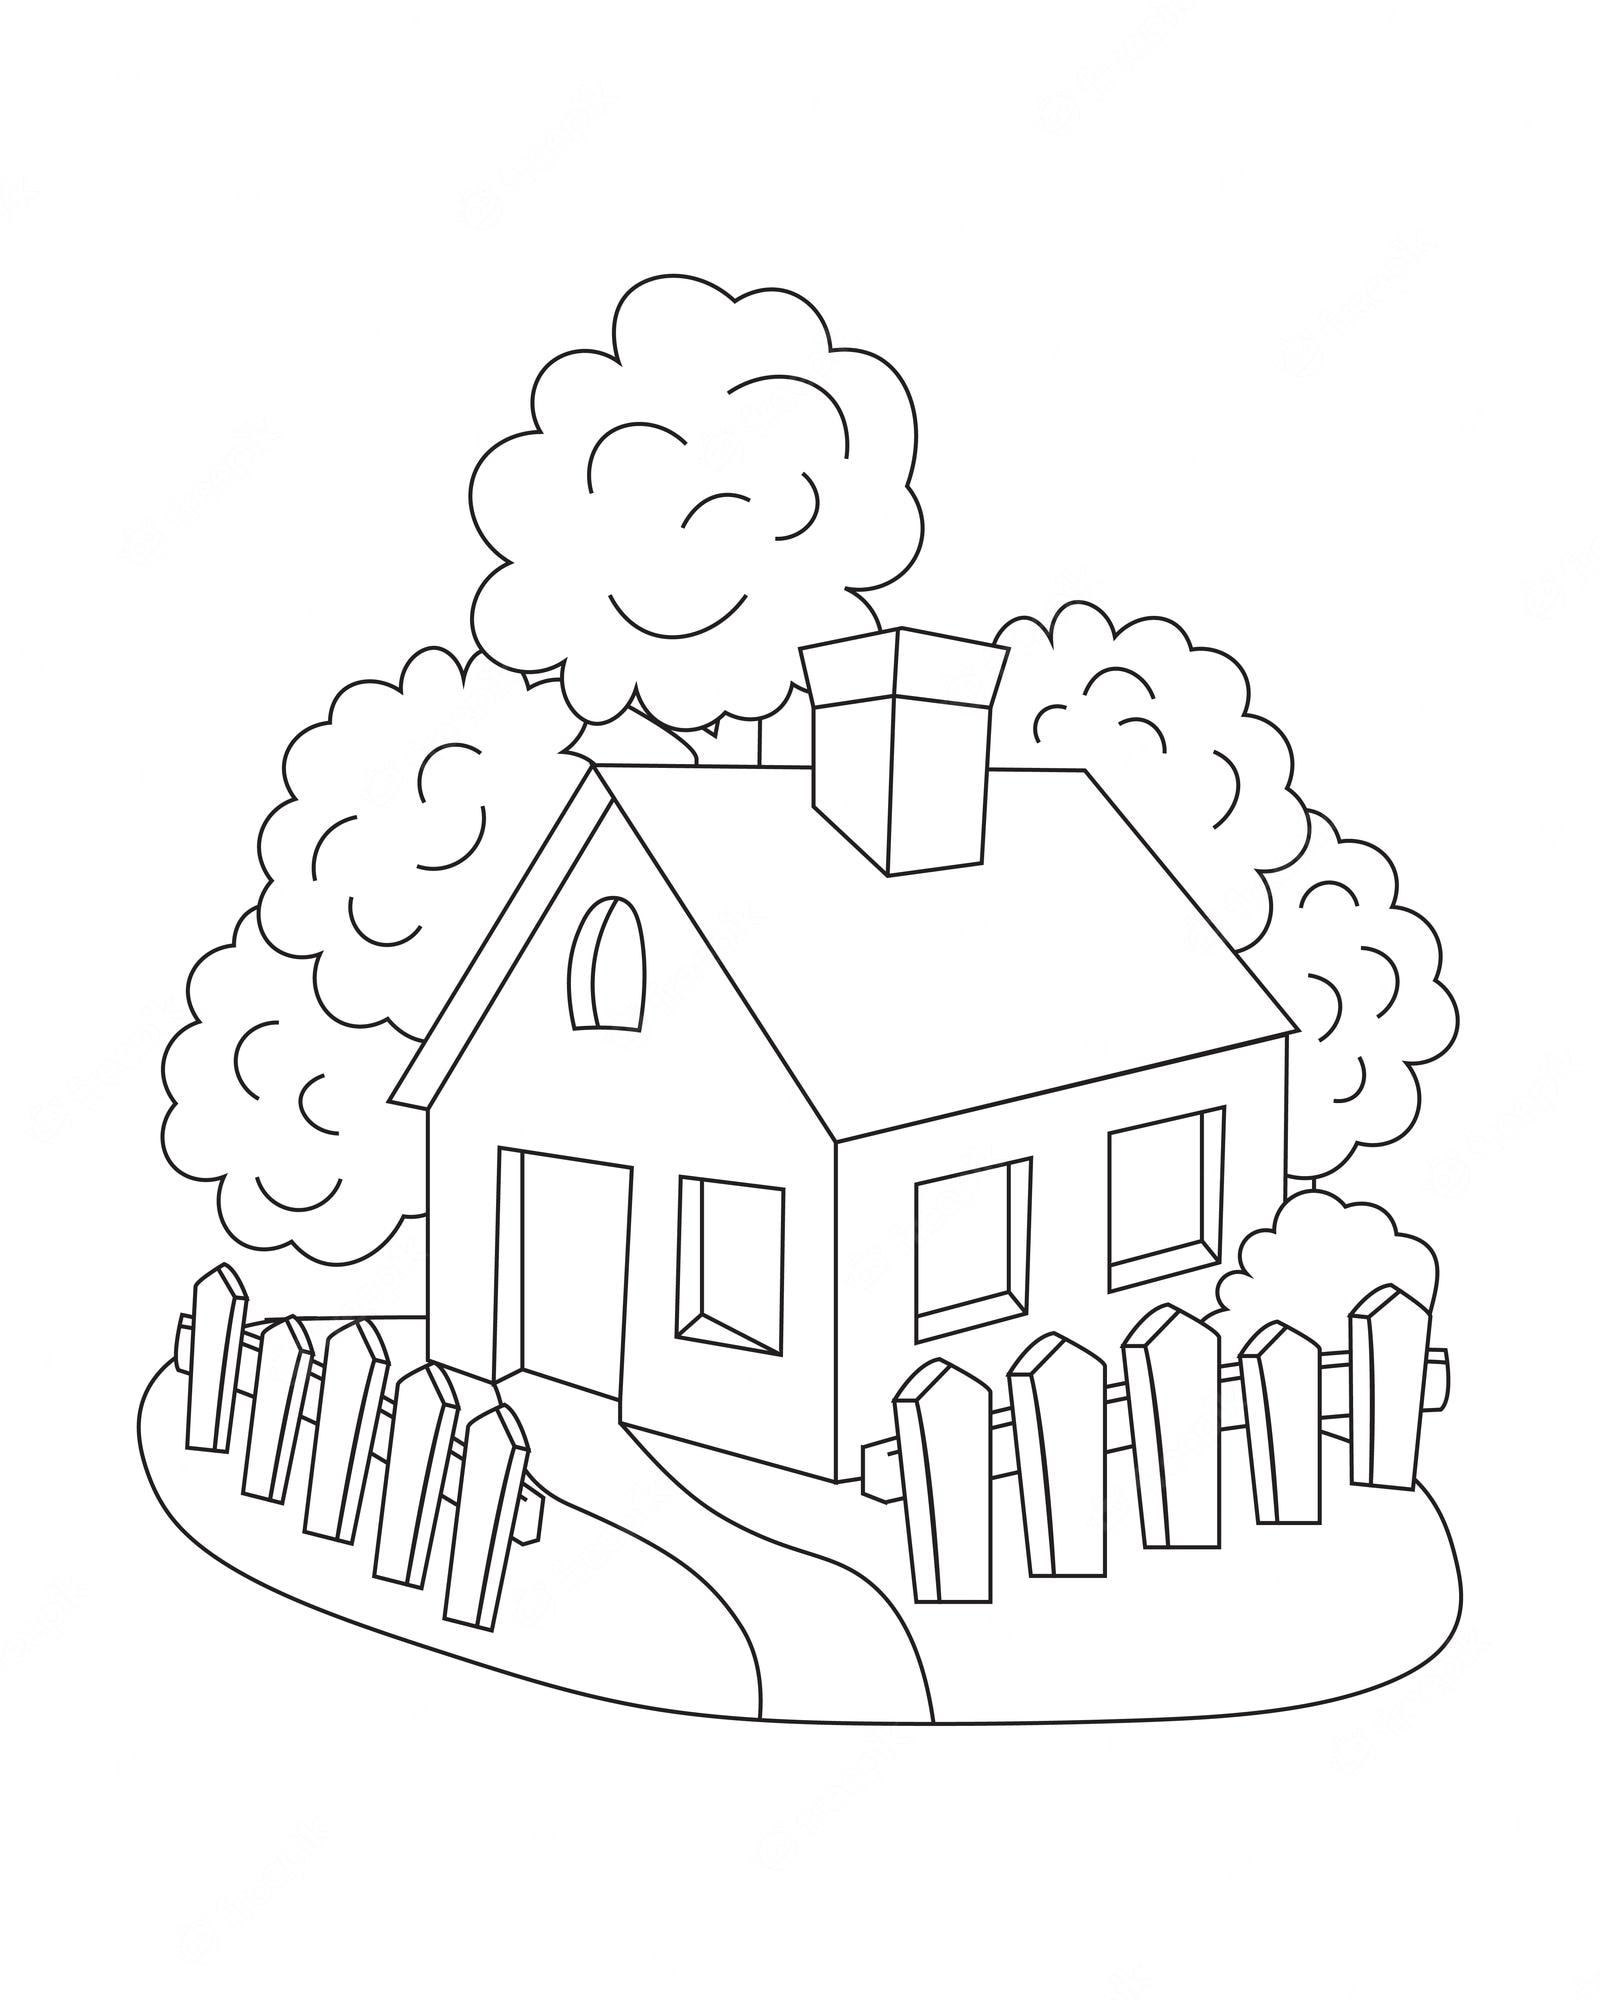 Premium Vector | Simple house coloring page village house coloring page  easy coloring page design